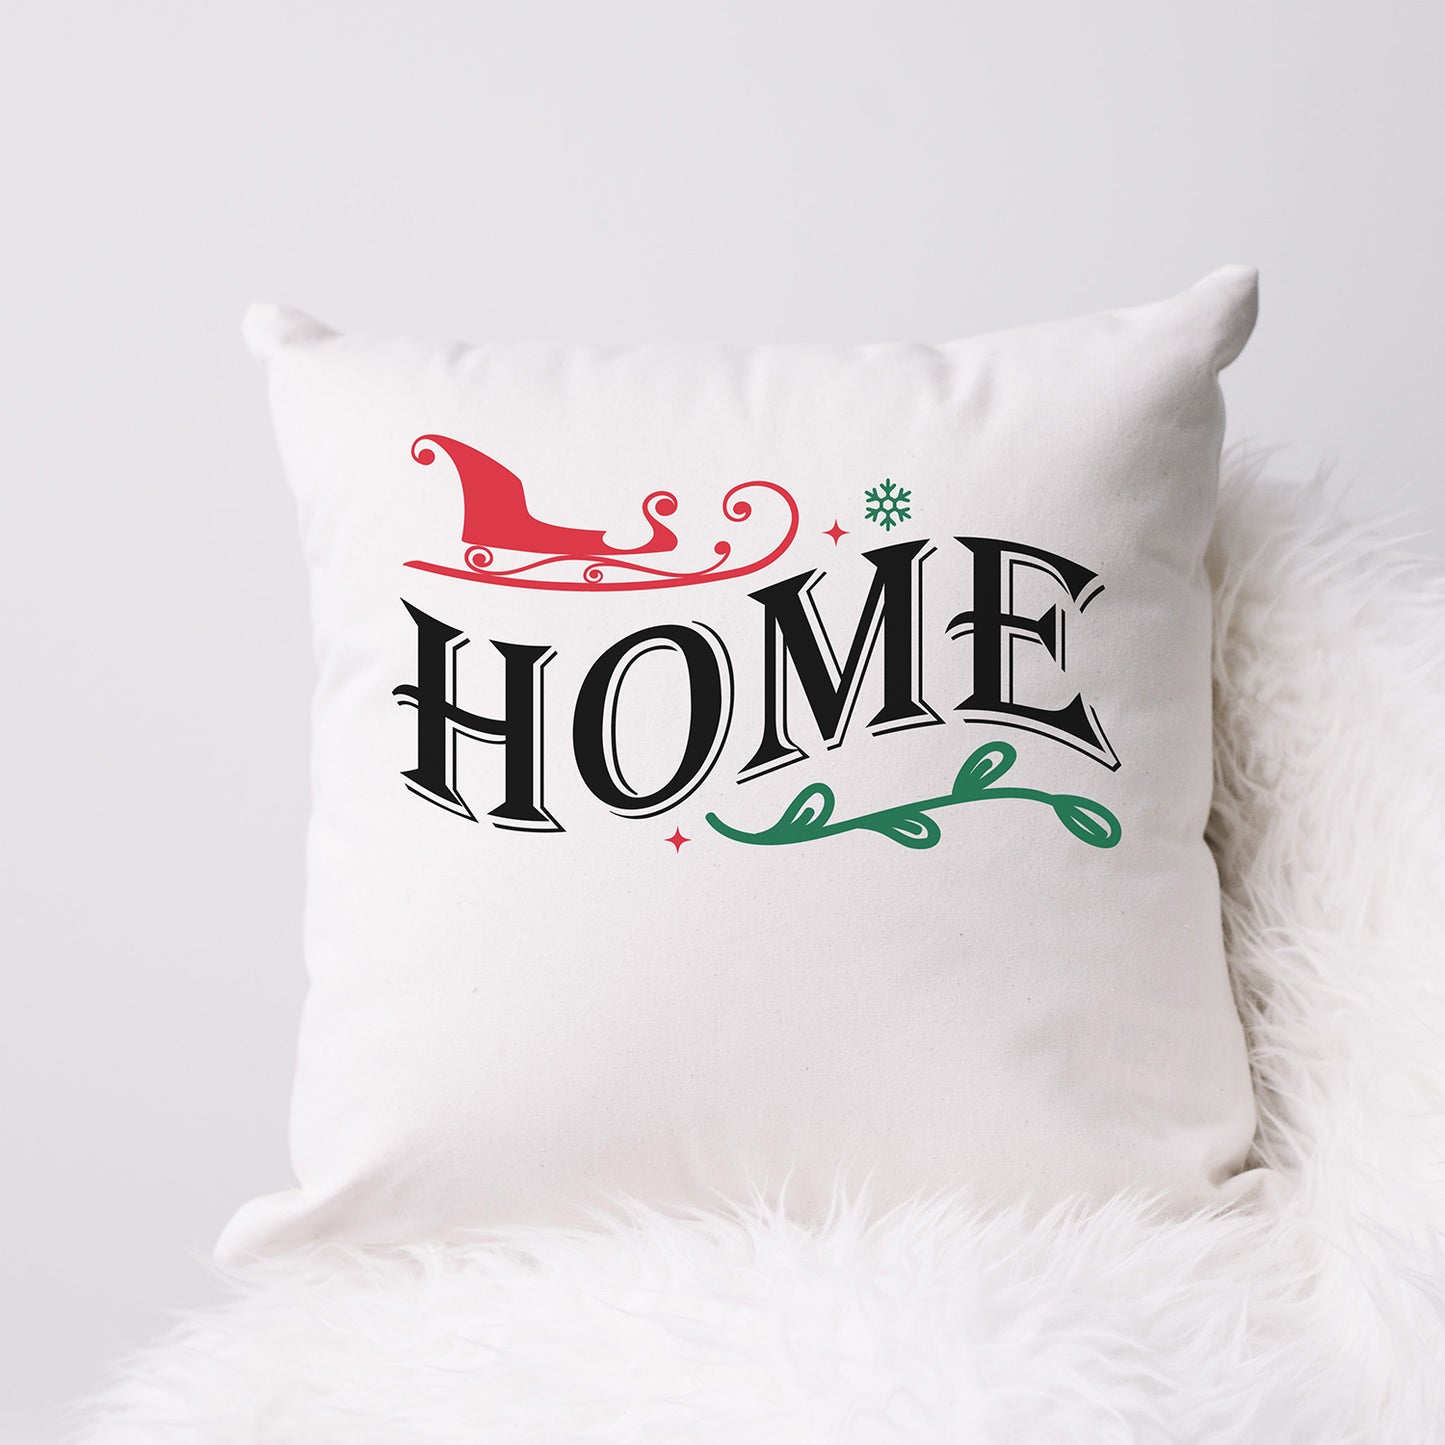 "Home" Graphic